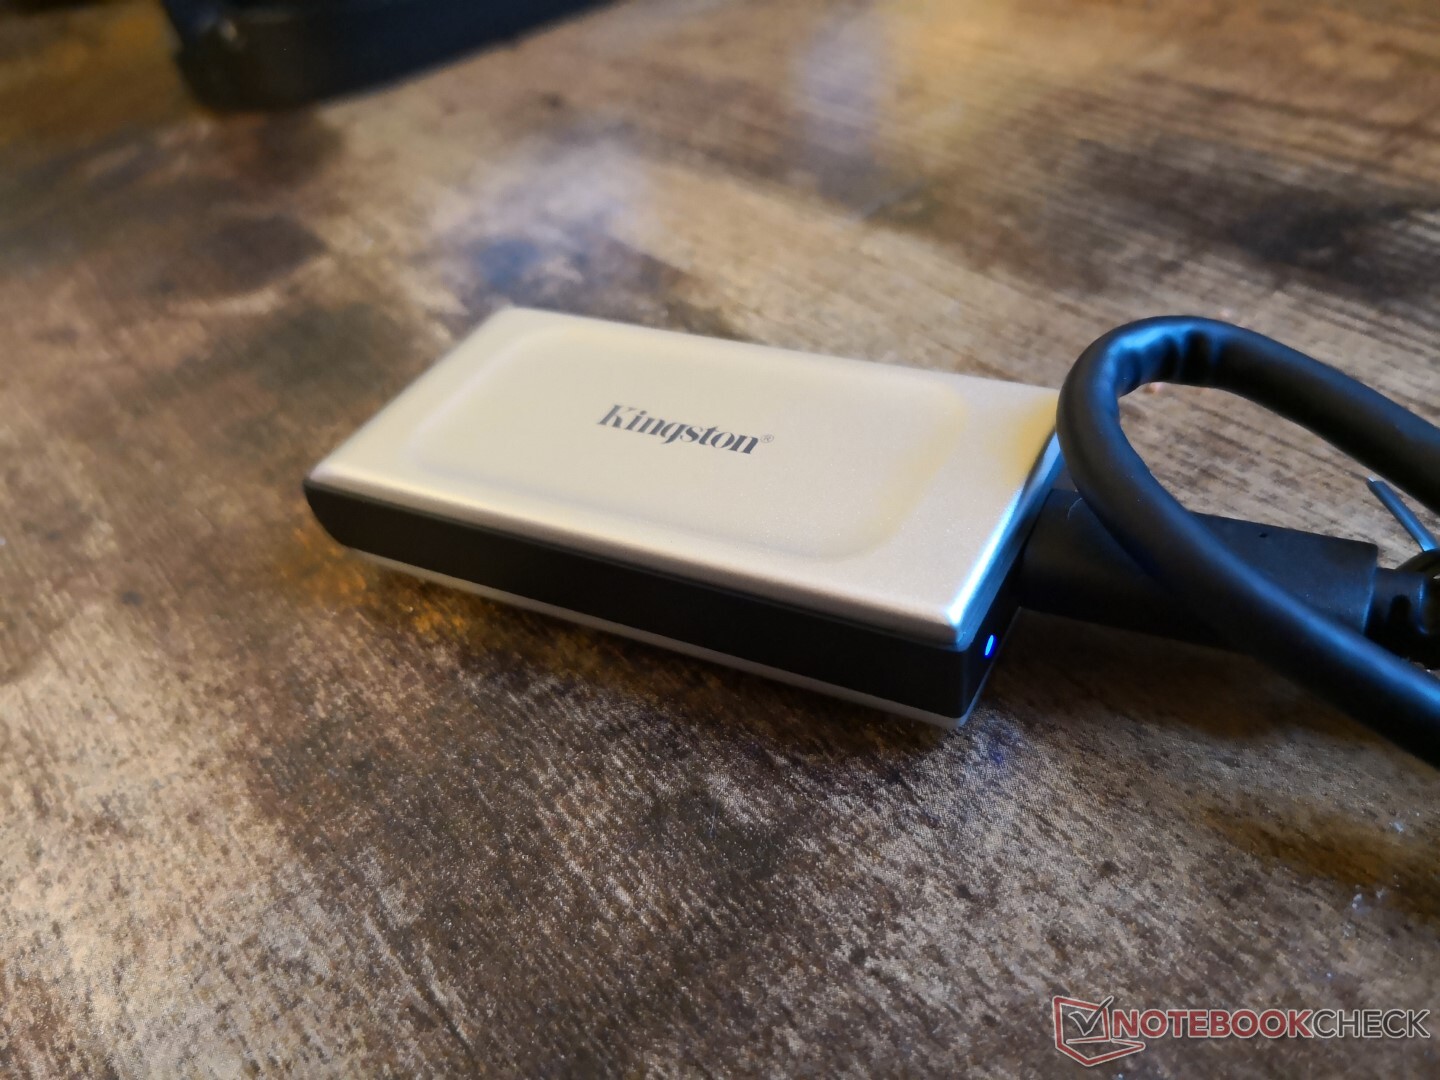 Kingston launches USB-C XS2000 external SSD with IP55